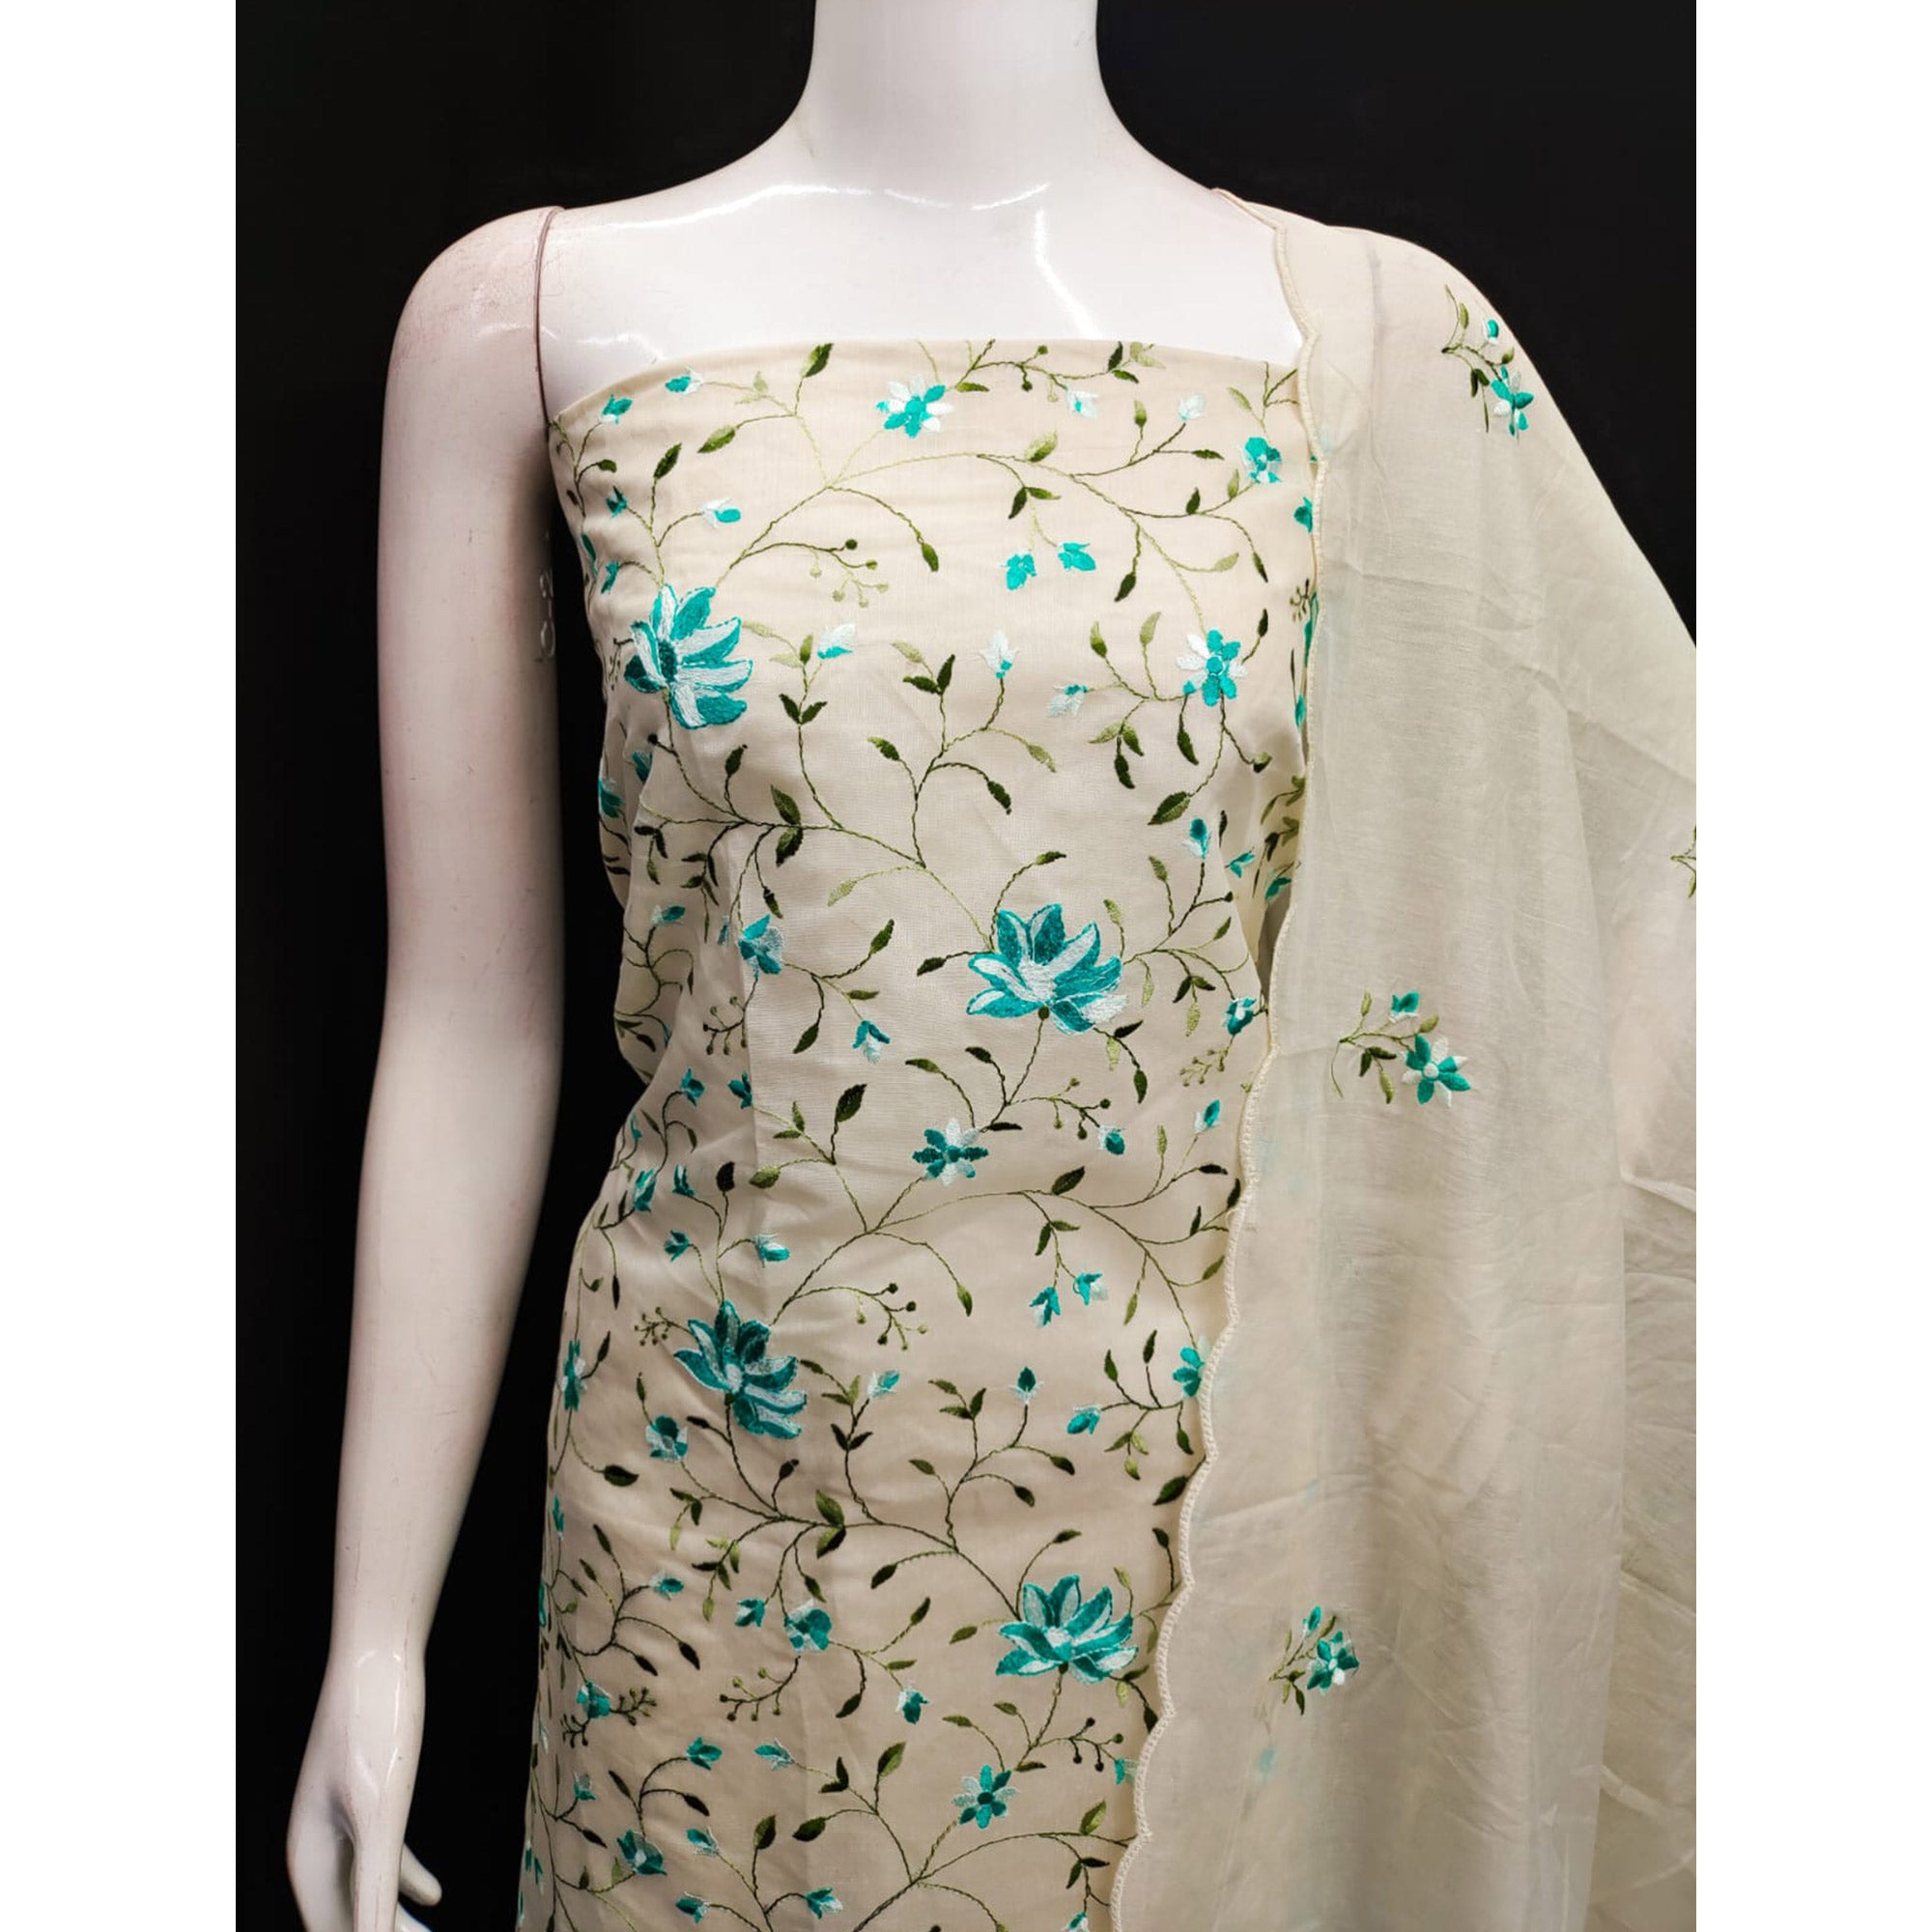 Off White & Turquoise Floral Embroidered Chanderi Silk Dress Material